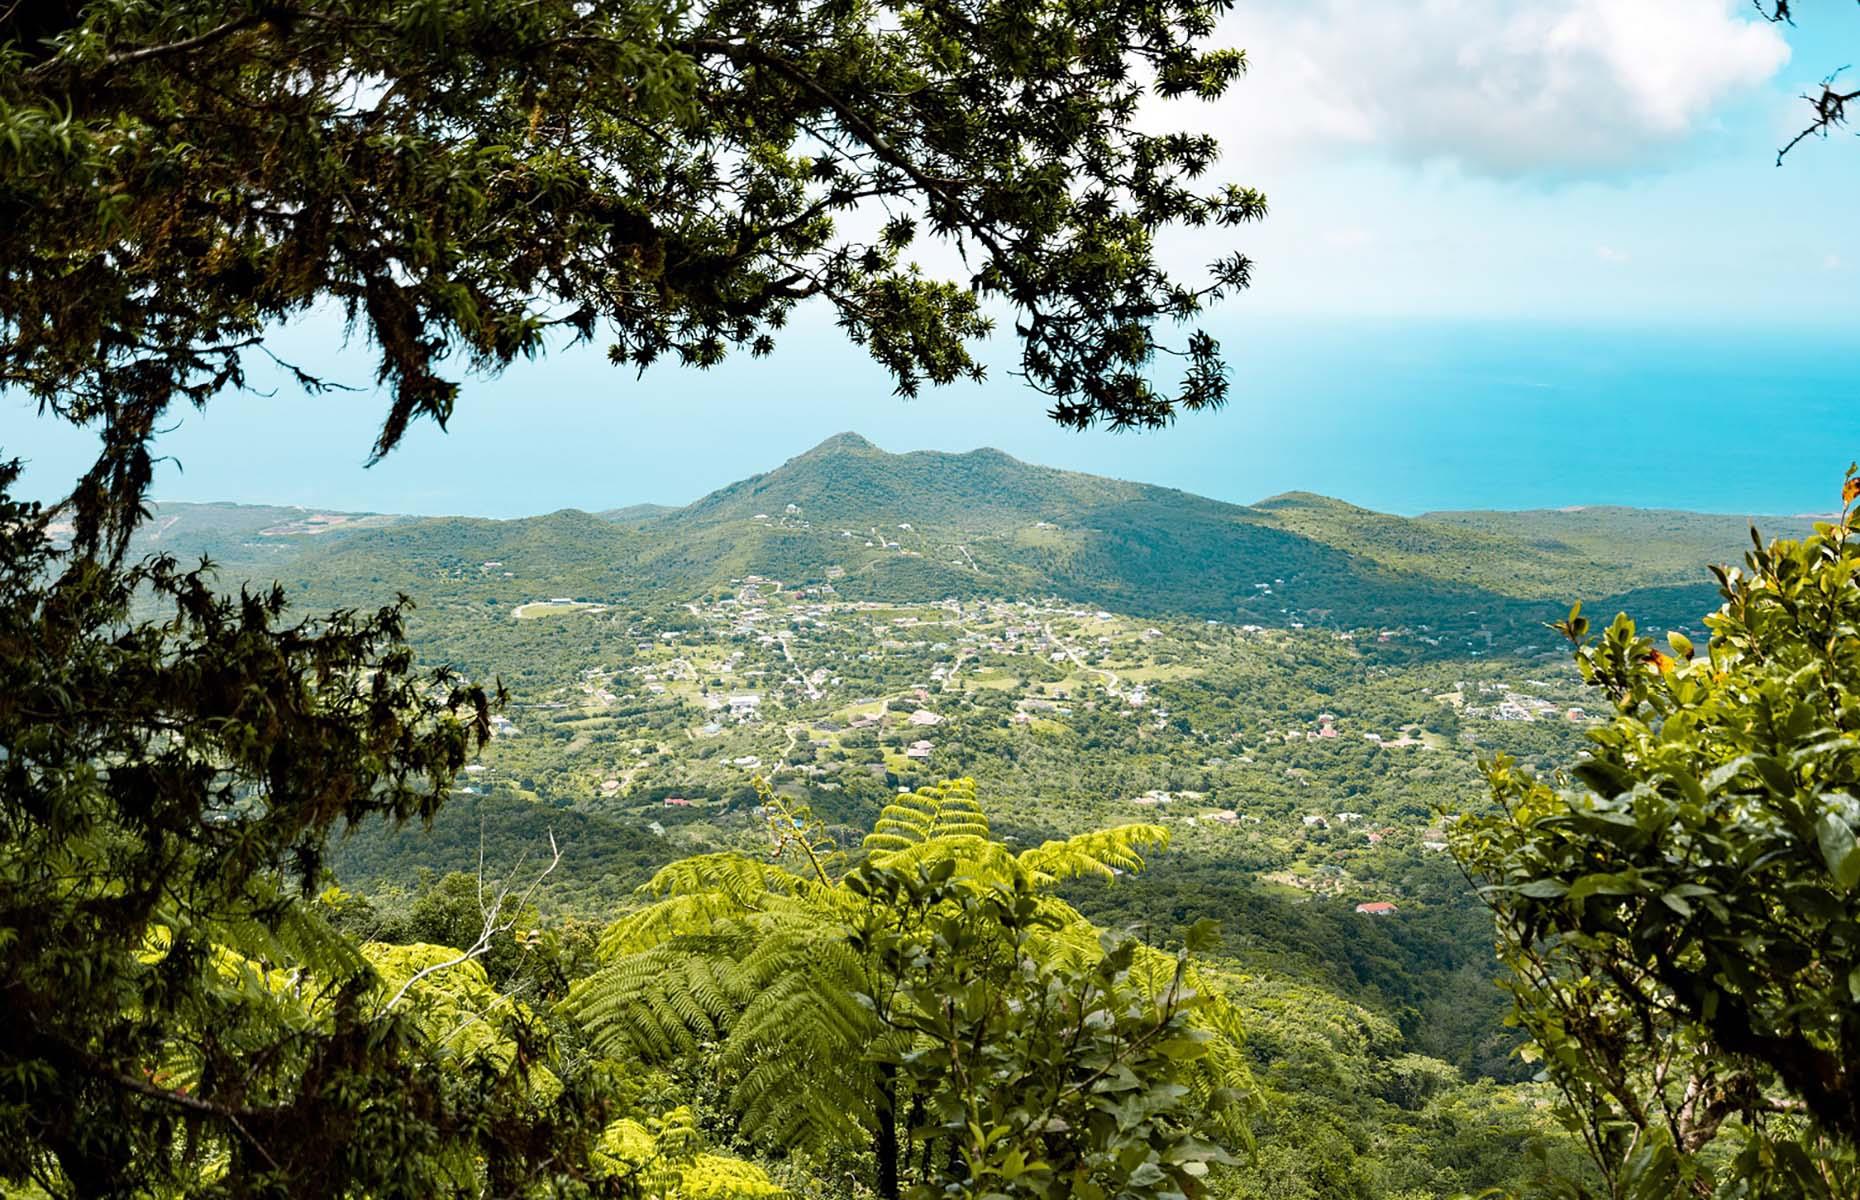 <p>Looming up from the center of the island, it’s impossible to ignore the cloud-shrouded, jungle-clad Mt Nevis – a 3,182-foot (970m) dormant volcano that you can scale with the help of a guide. The hike starts off slow, with a gradual incline and leaf-scattered terrain, but don’t be deceived; sooner rather than later, the going gets tough. The at-times devilishly difficult, near-vertical ascent is filled with rocks and roots to scramble over, with muddy ropes on hand at the trickiest moments to assist with the climb. Persevere through it, though, and you’ll be rewarded with truly remarkable views over the island – and a sense of achievement that can’t be beat.</p>